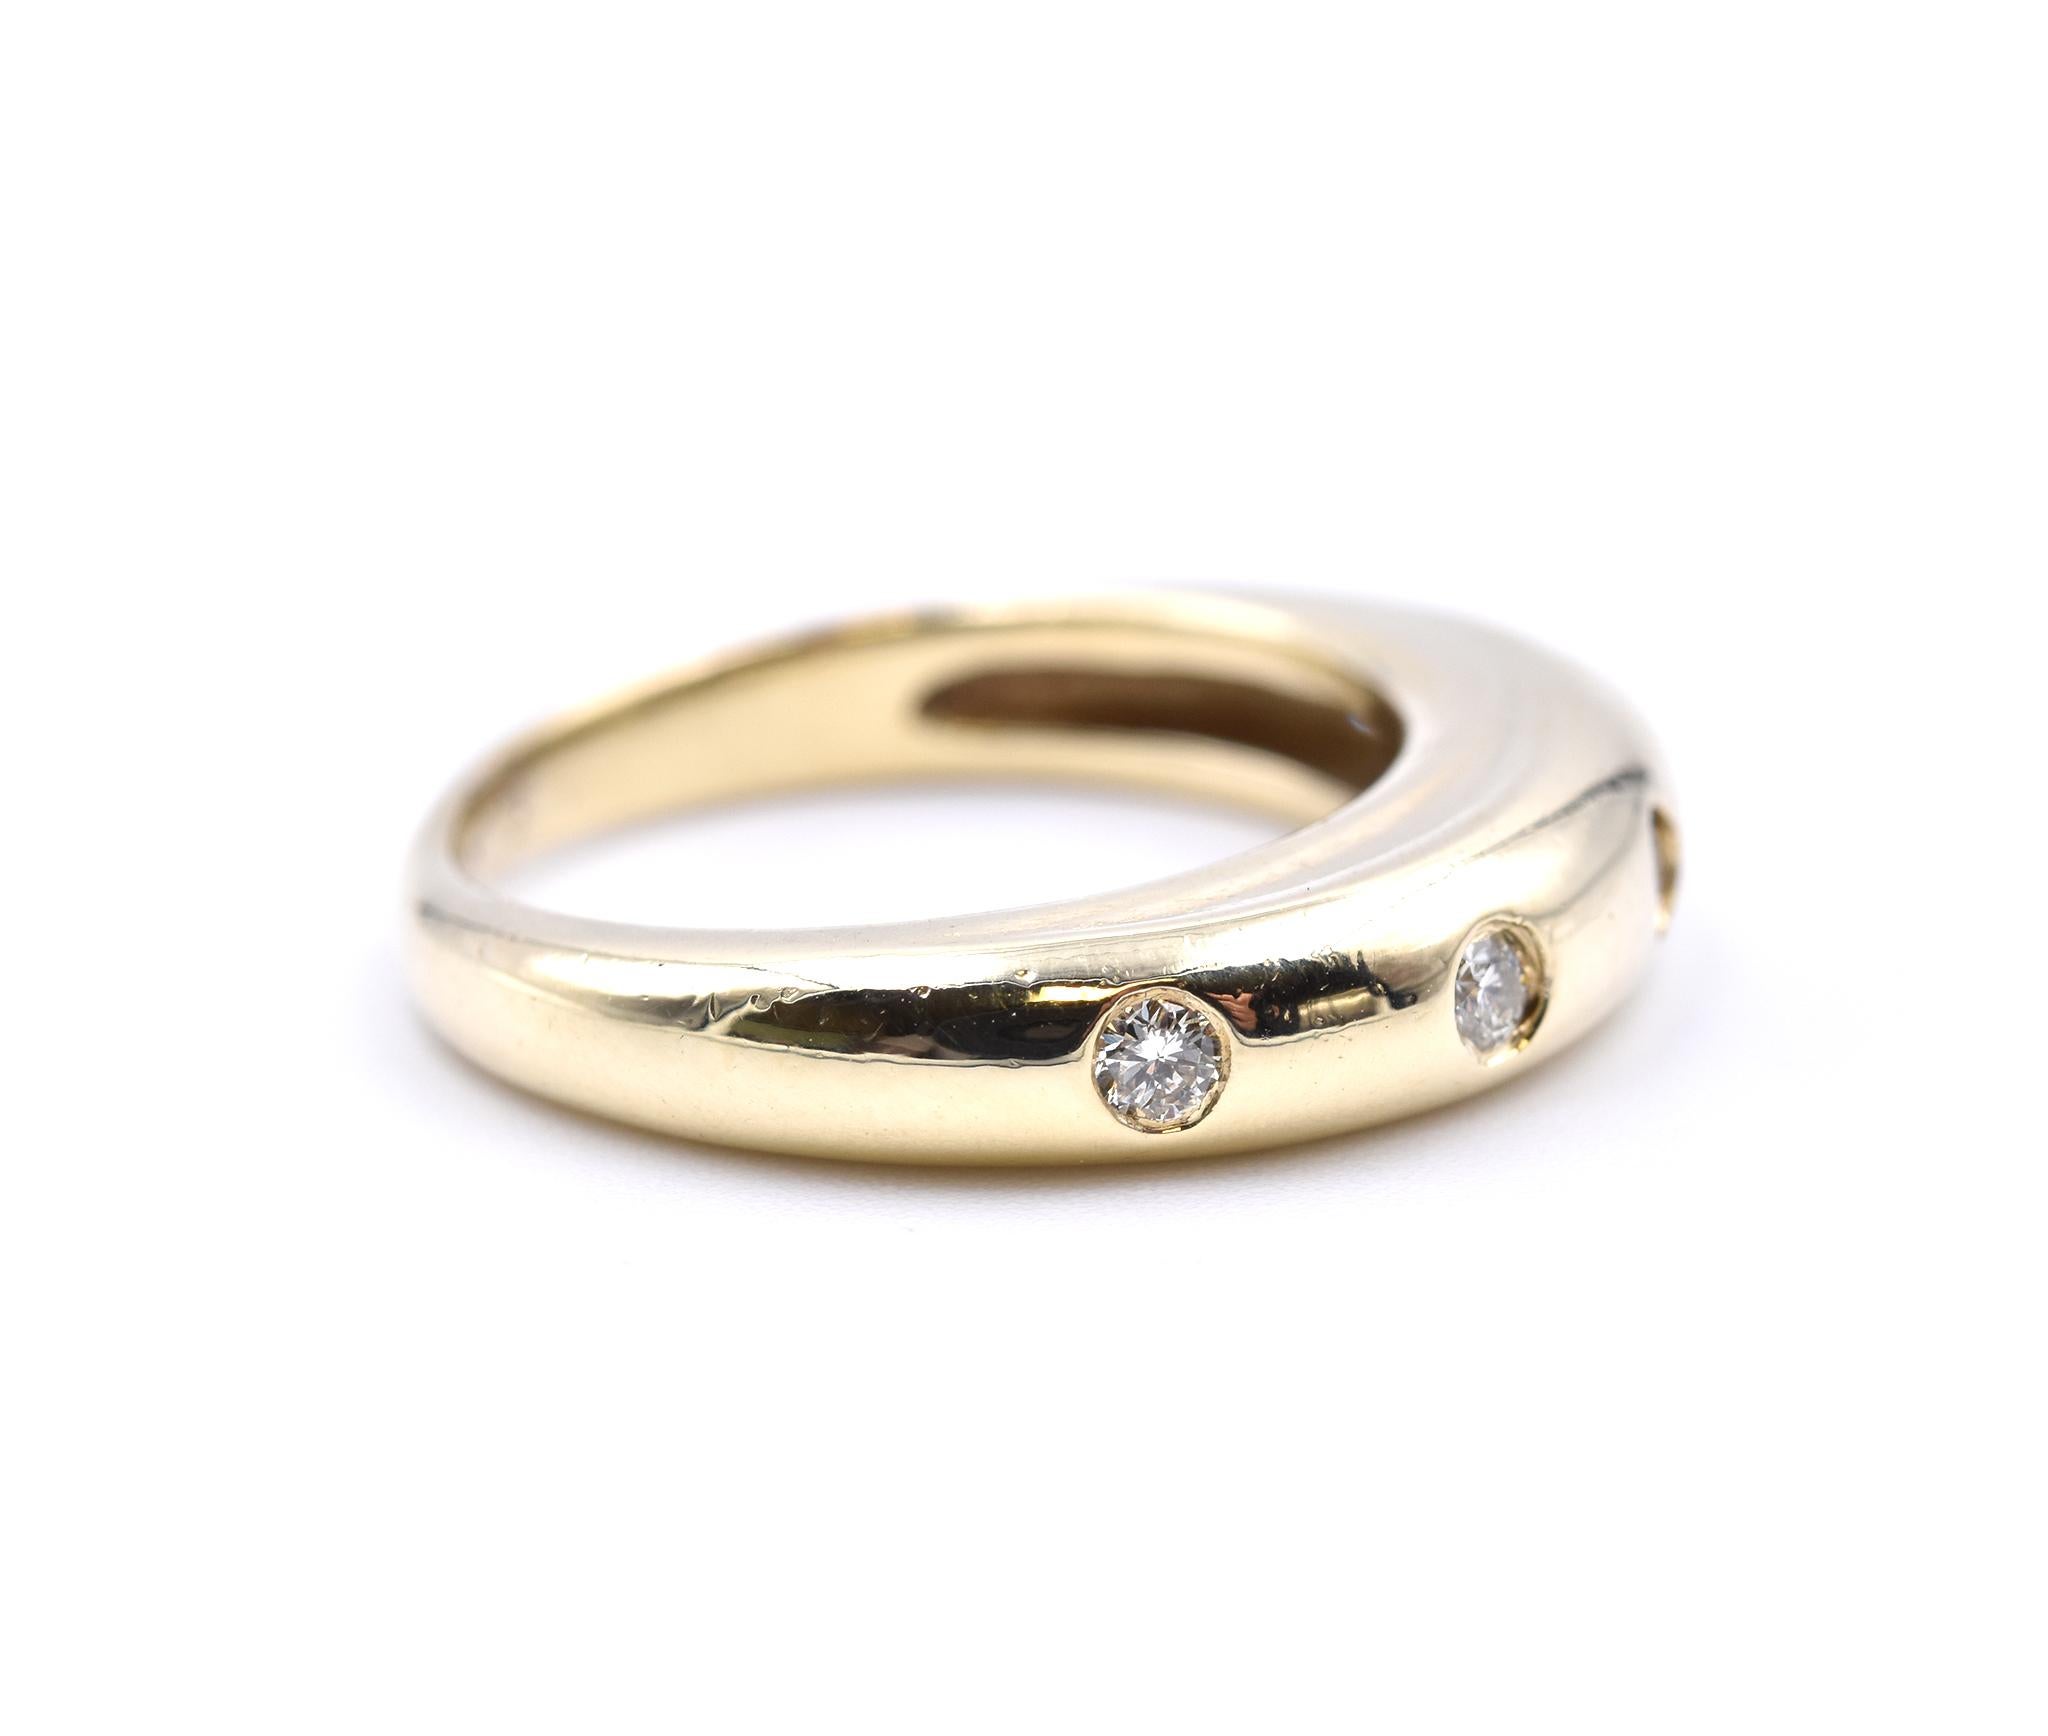 Material: 14K yellow gold 
Diamonds: 5 round brilliant cut = .25cttw
Color: H
Clarity: SI1
Ring Size: 5 (please allow up to 2 additional business days for sizing requests)
Dimensions: ring measures 4.6mm wide
Weight: 5.15 grams
